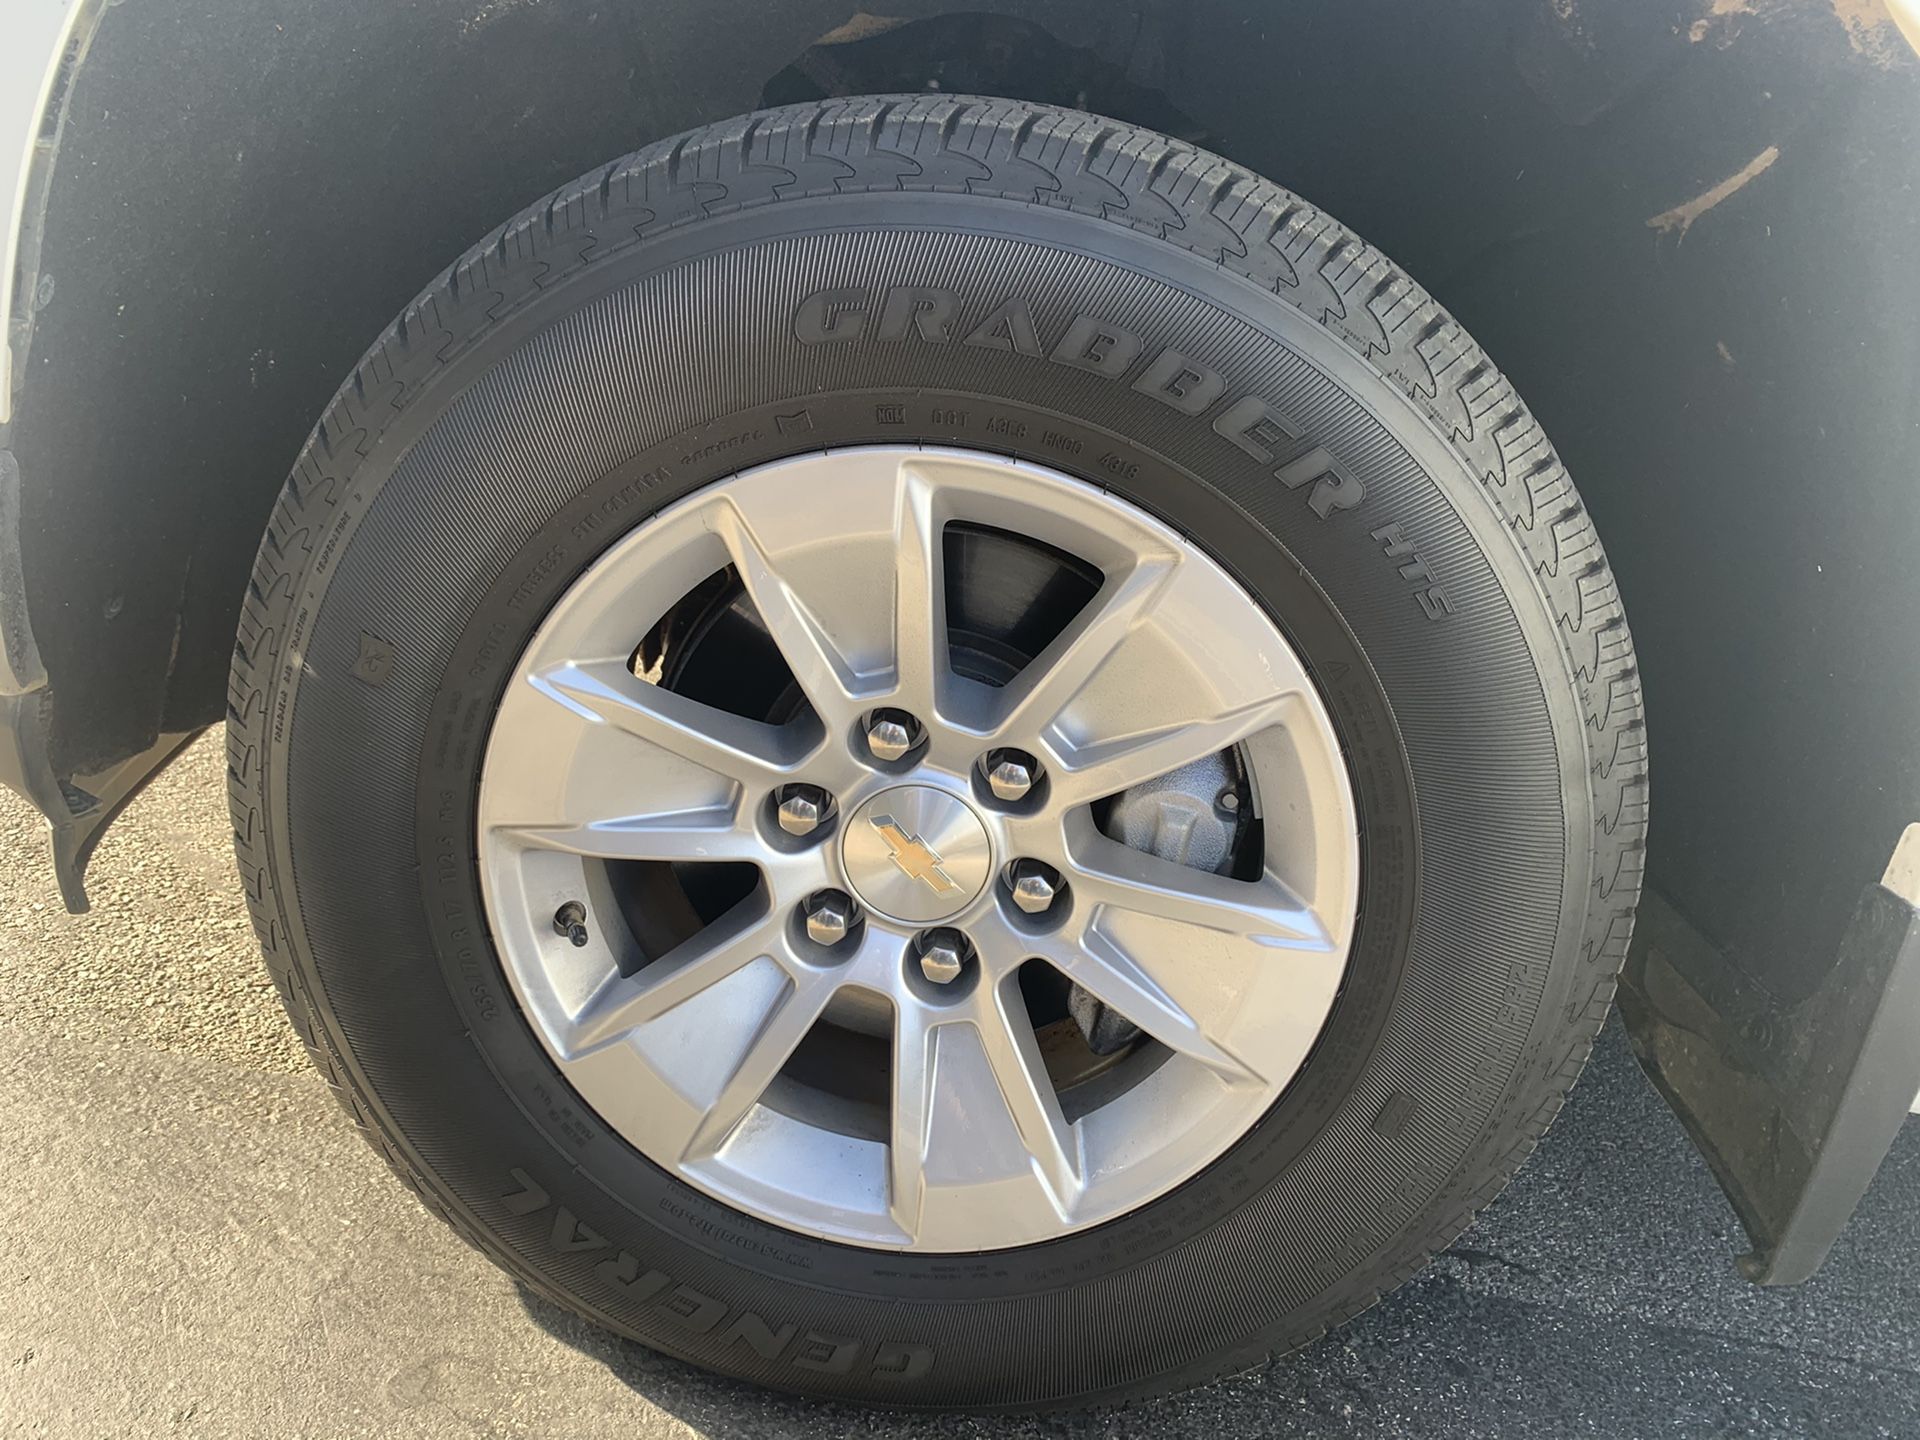 OBO$$ 2019 stock chevy rims and tires 4500 miles on them